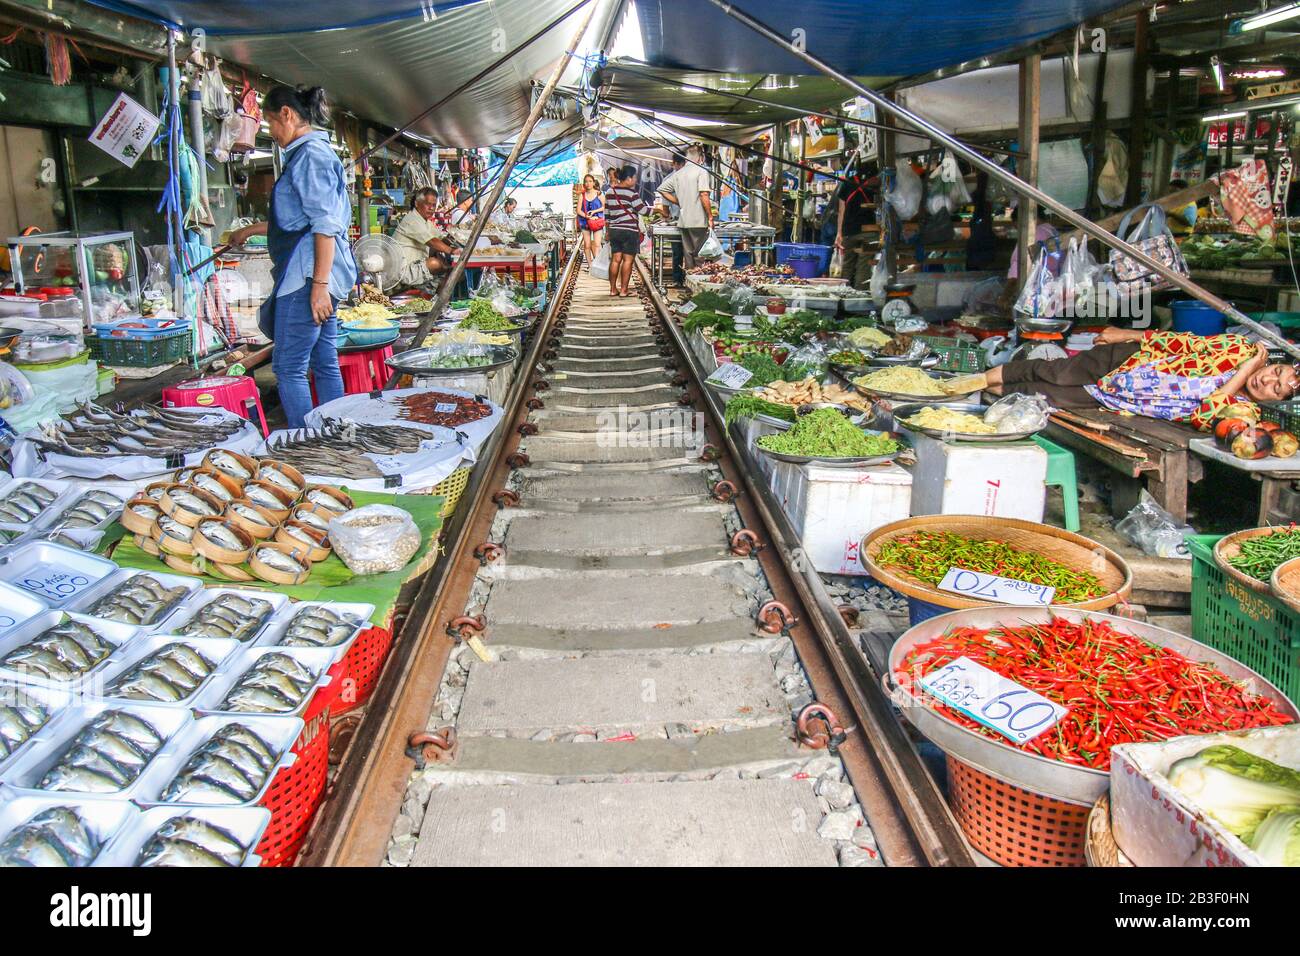 Vendors in the unique Maeklong wet market selling their wares and vegetables along the Maeklong railway tracks Stock Photo